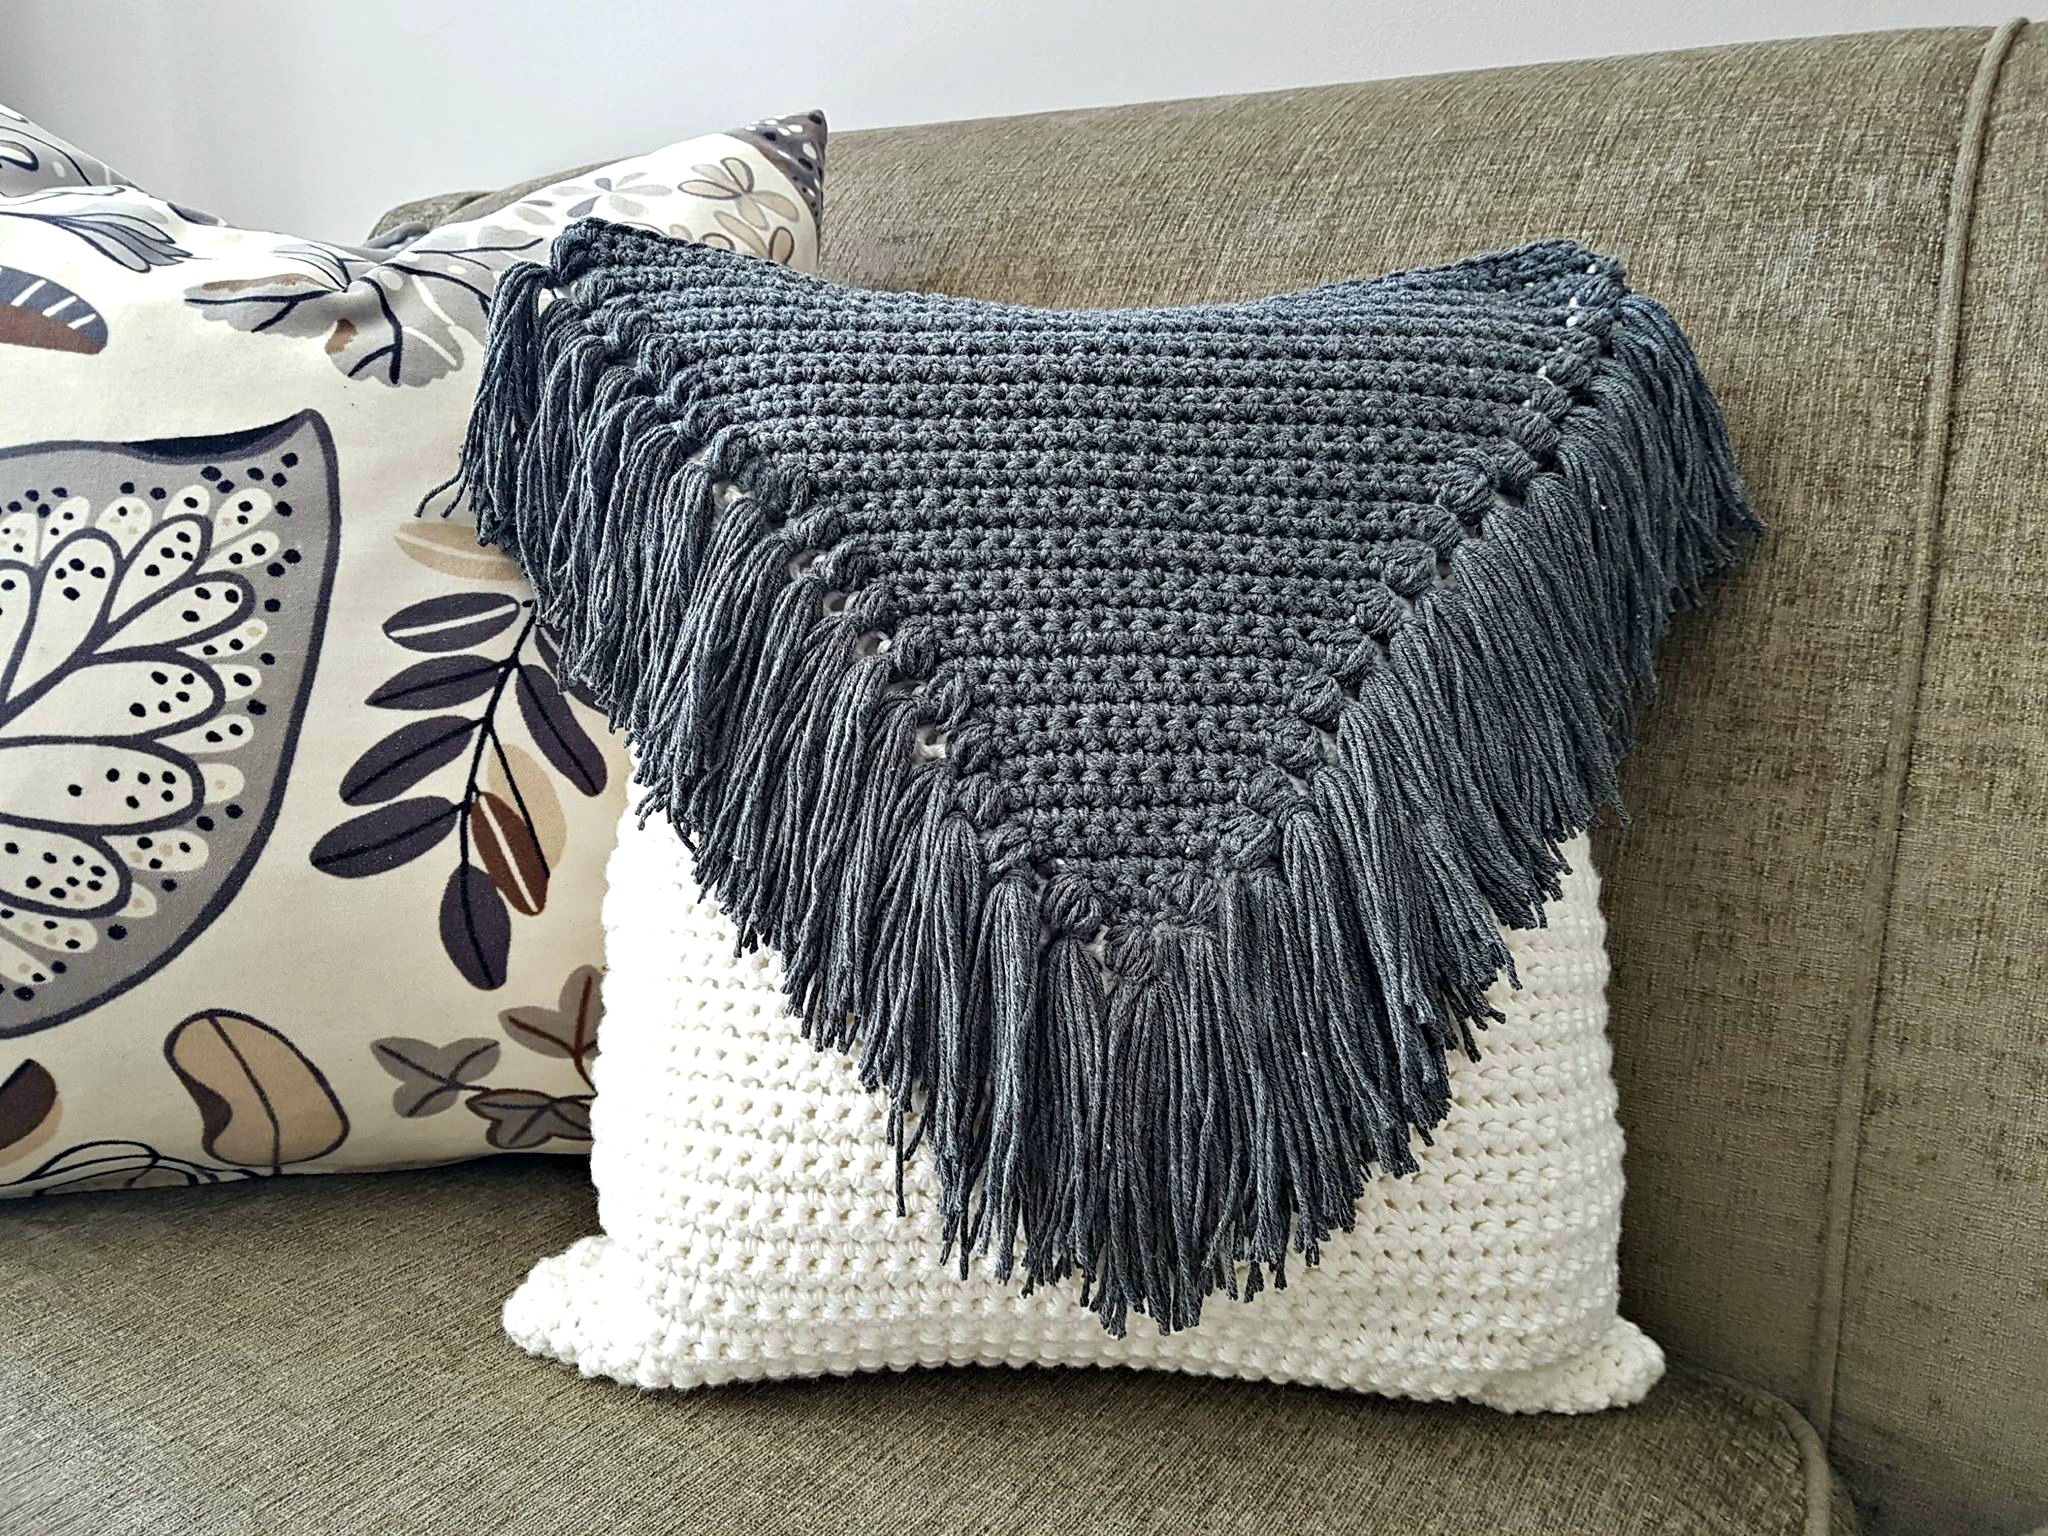 My Favorite Pillow crochet pattern by Sincerely, Pam